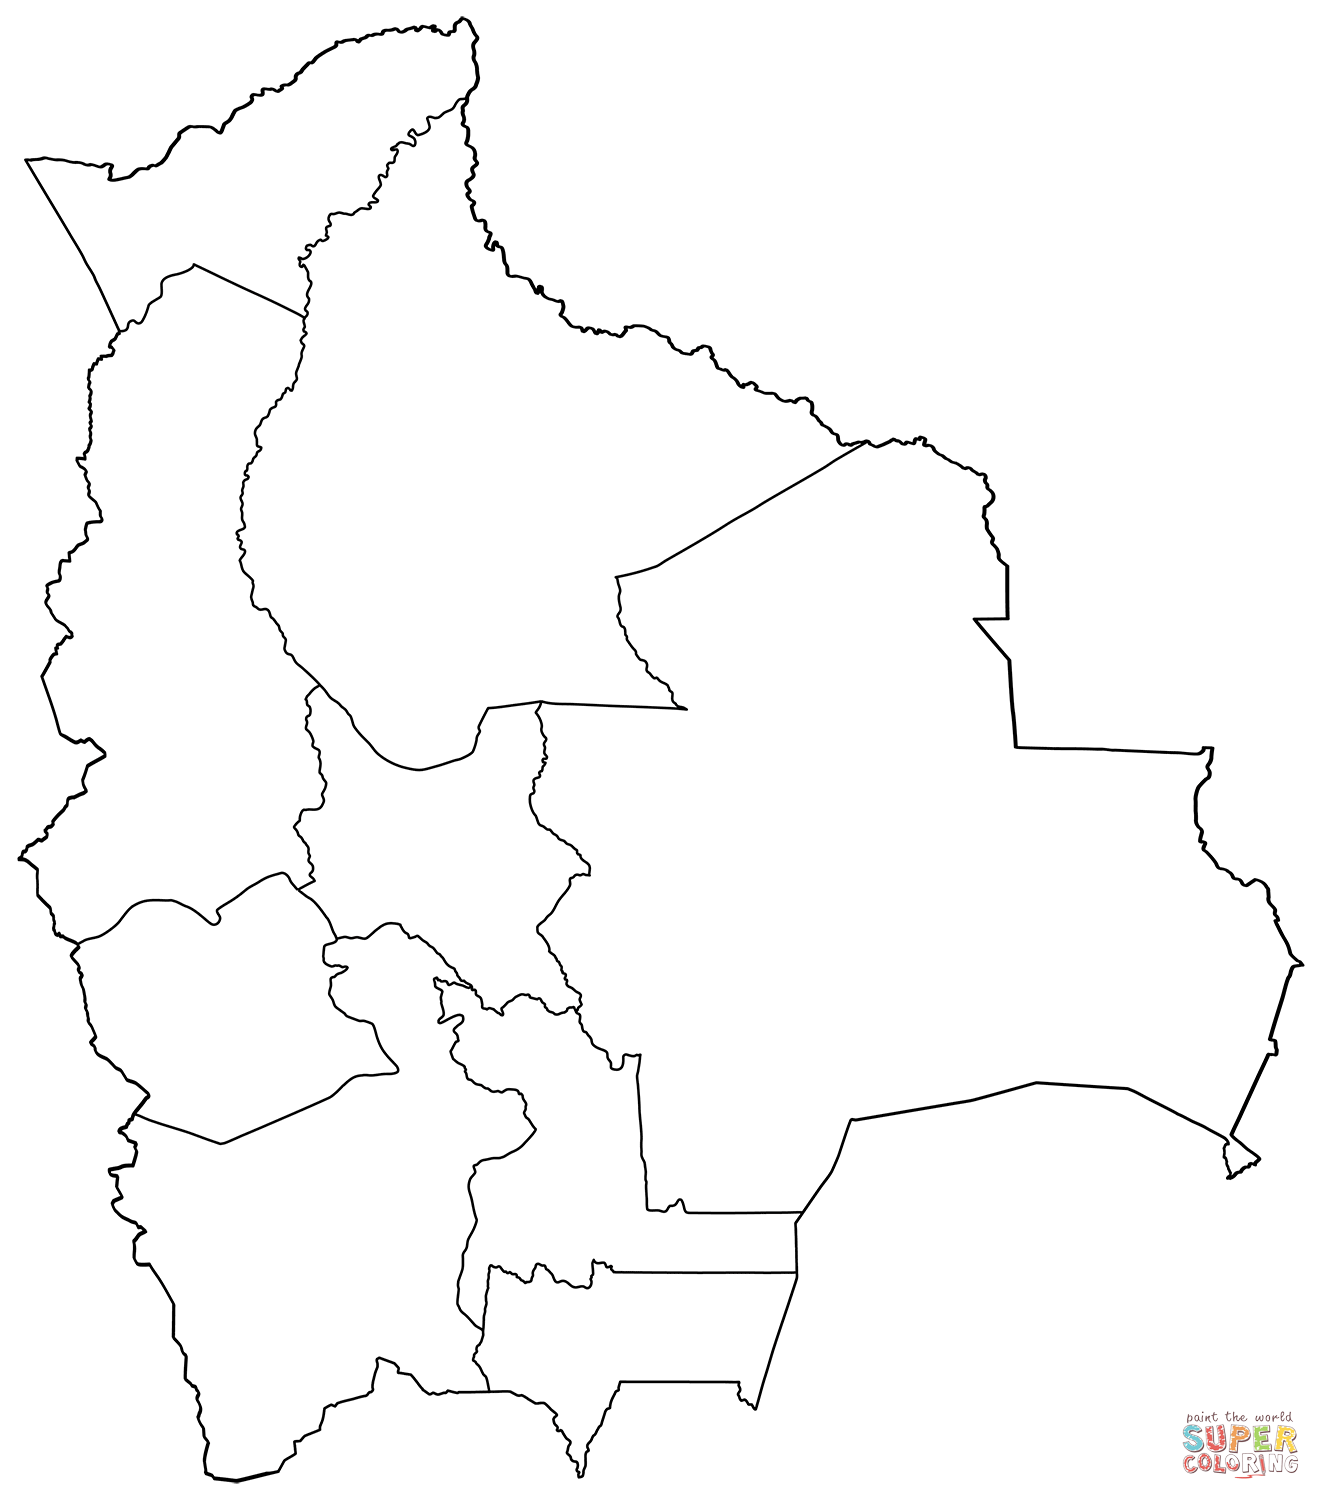 Outline map of bolivia with regions coloring page free printable coloring pages